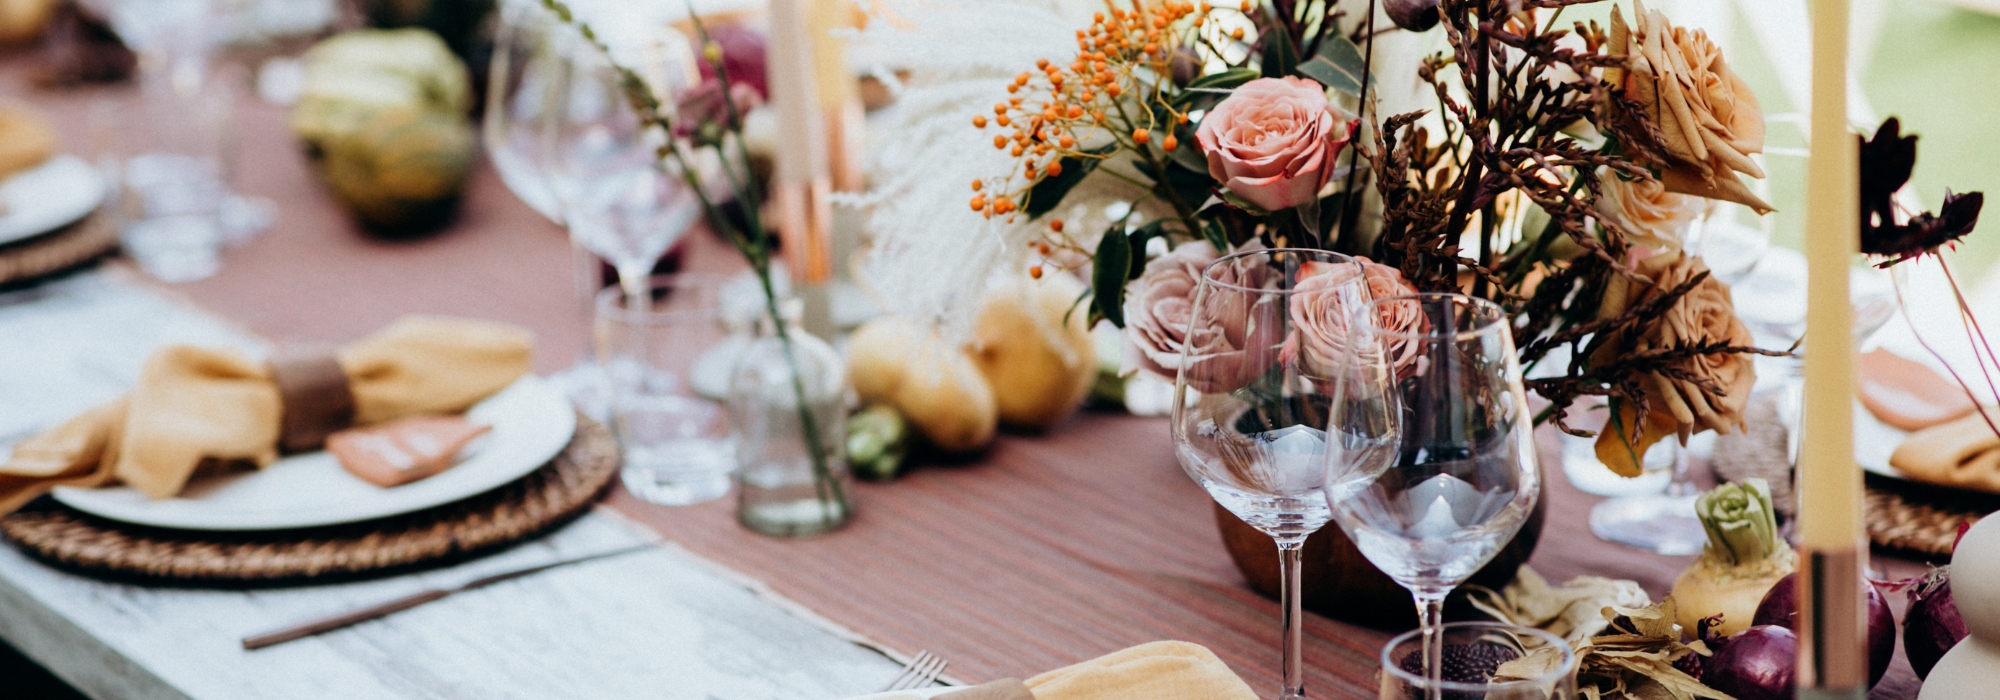 beautiful wedding reception table with fall-themed colors